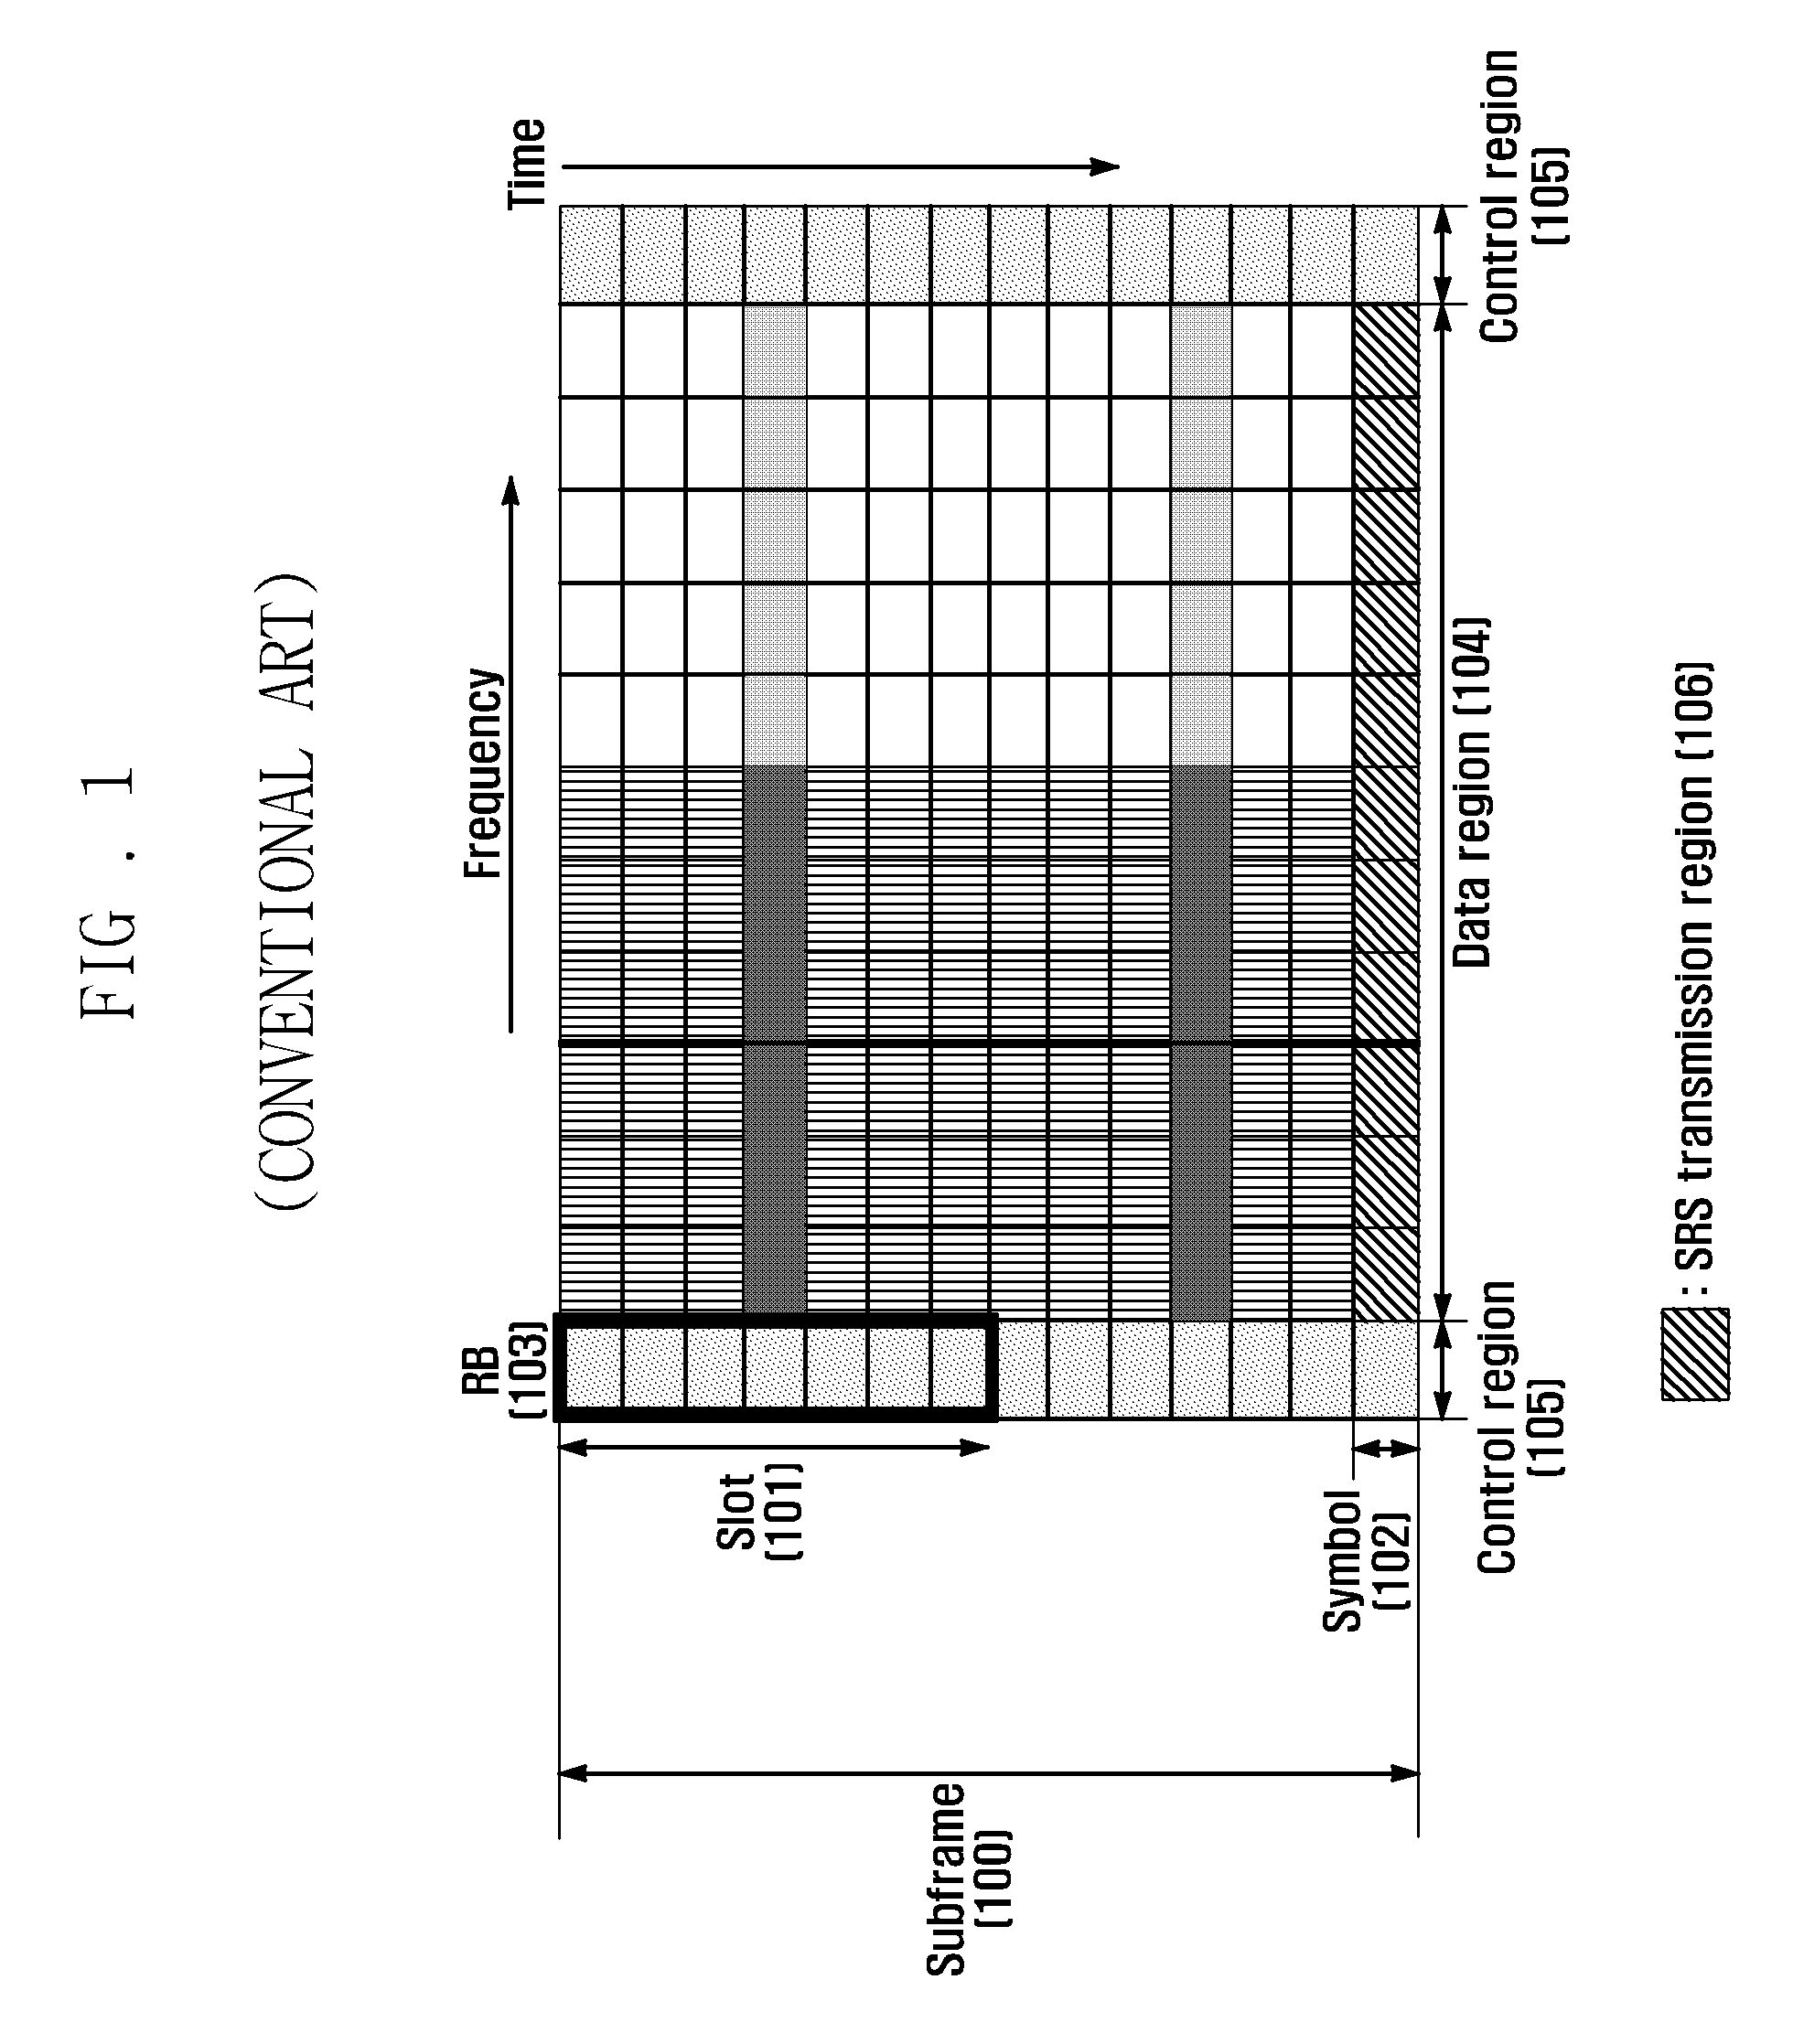 Apparatus and method for transmission of sounding reference signal in uplink wireless communication systems with multiple antennas and sounding reference signal hopping